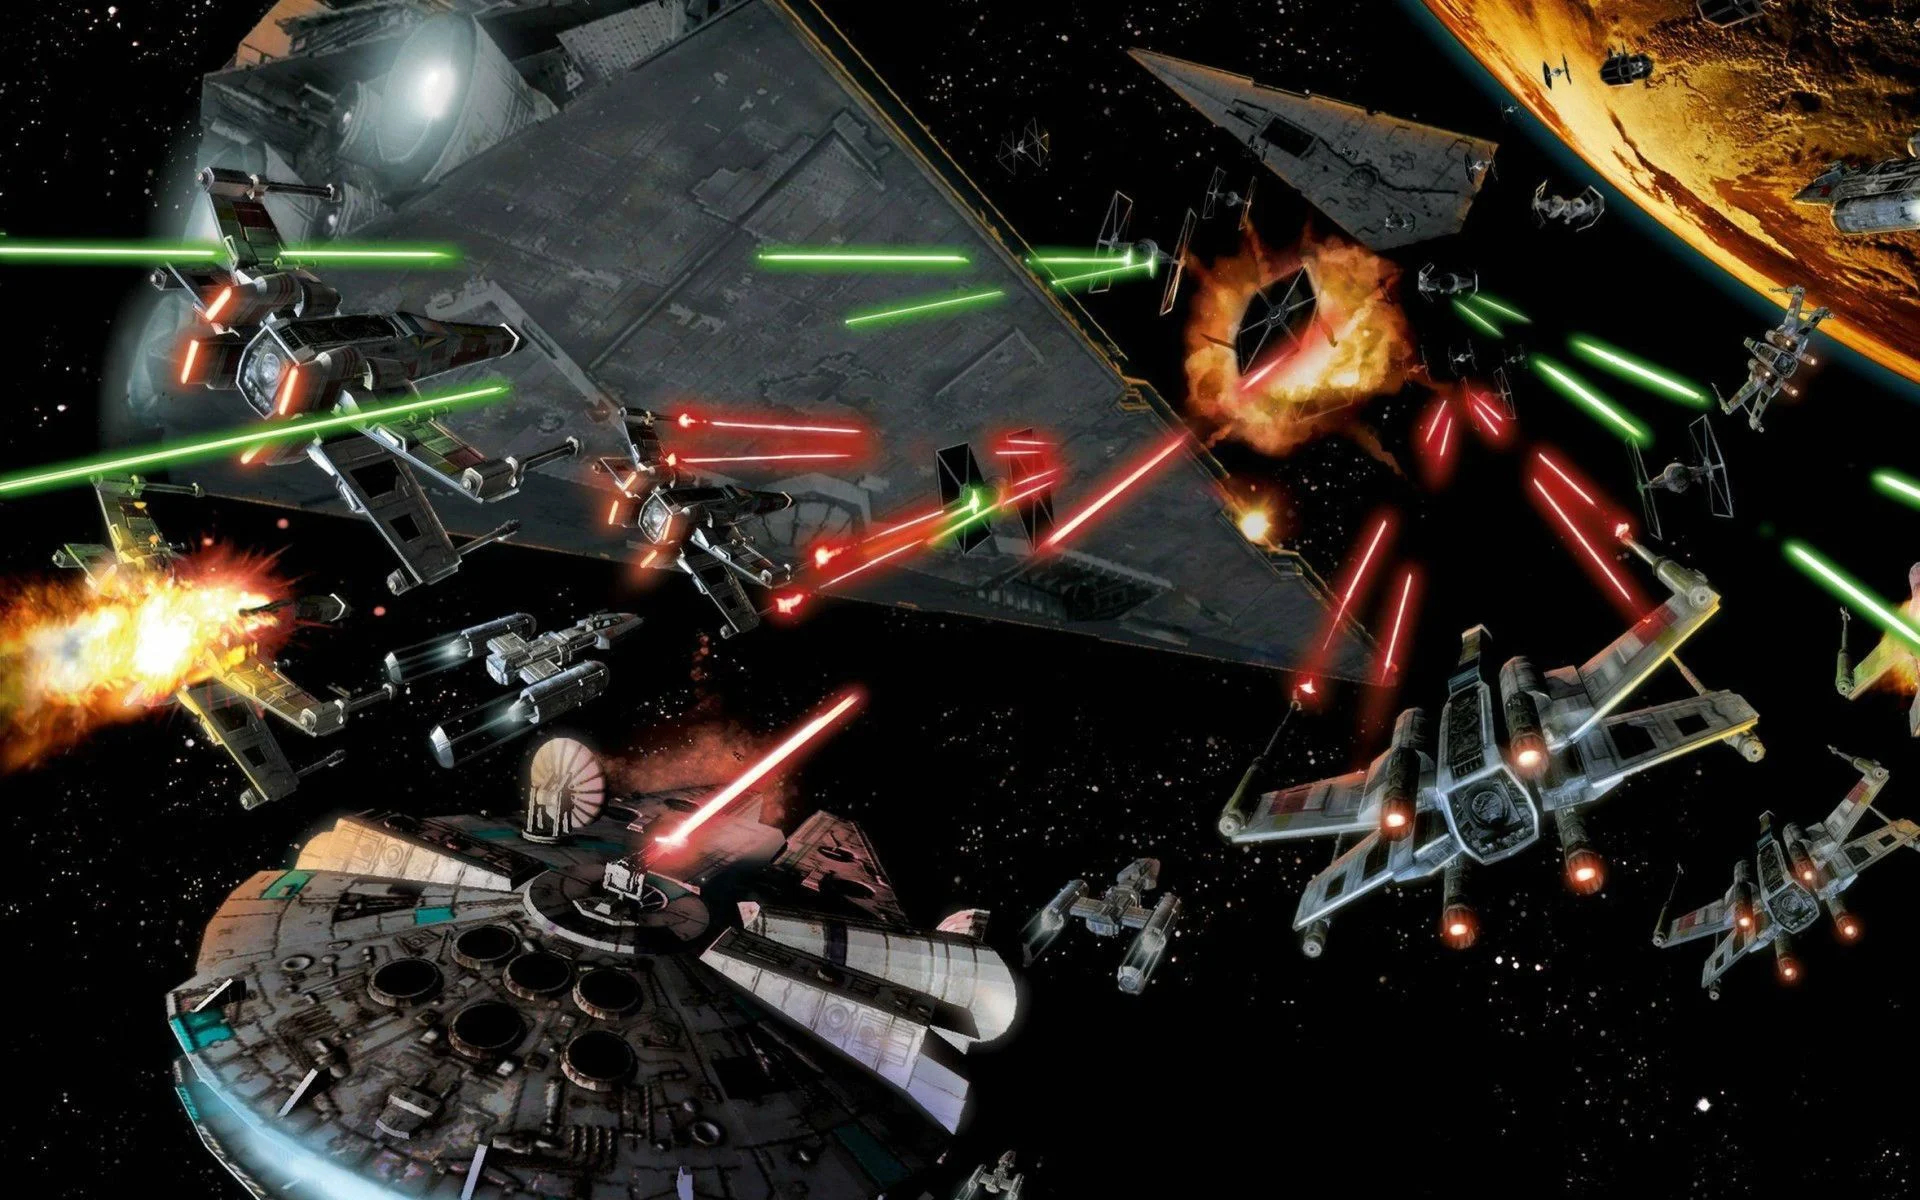 1920x1200 Star Wars Space Battle Wallpapers Top Free Star Wars Space Battle Backgrounds